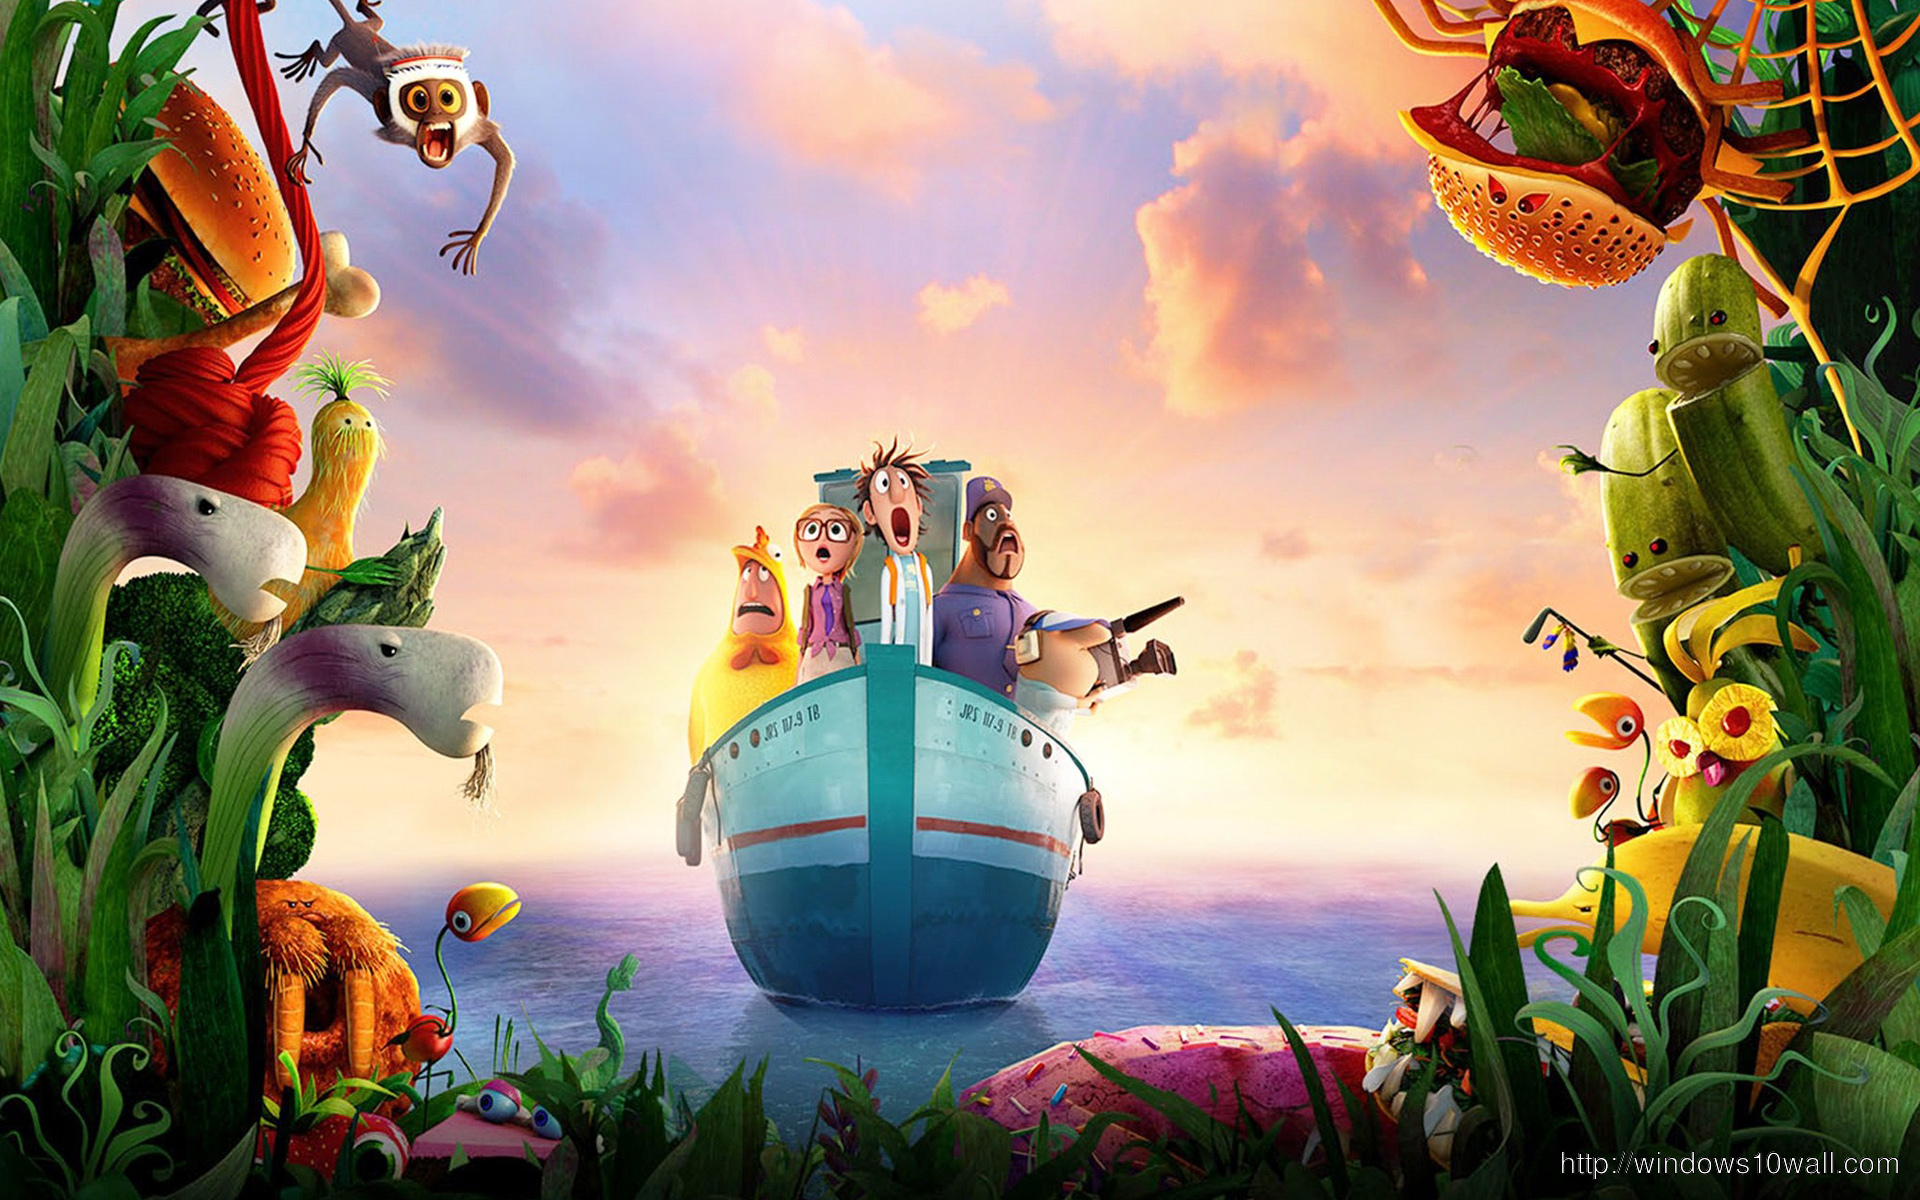 CLOUDY WITH A CHANCE OF MEATBALLS 2 BACKGROUND IMAGE